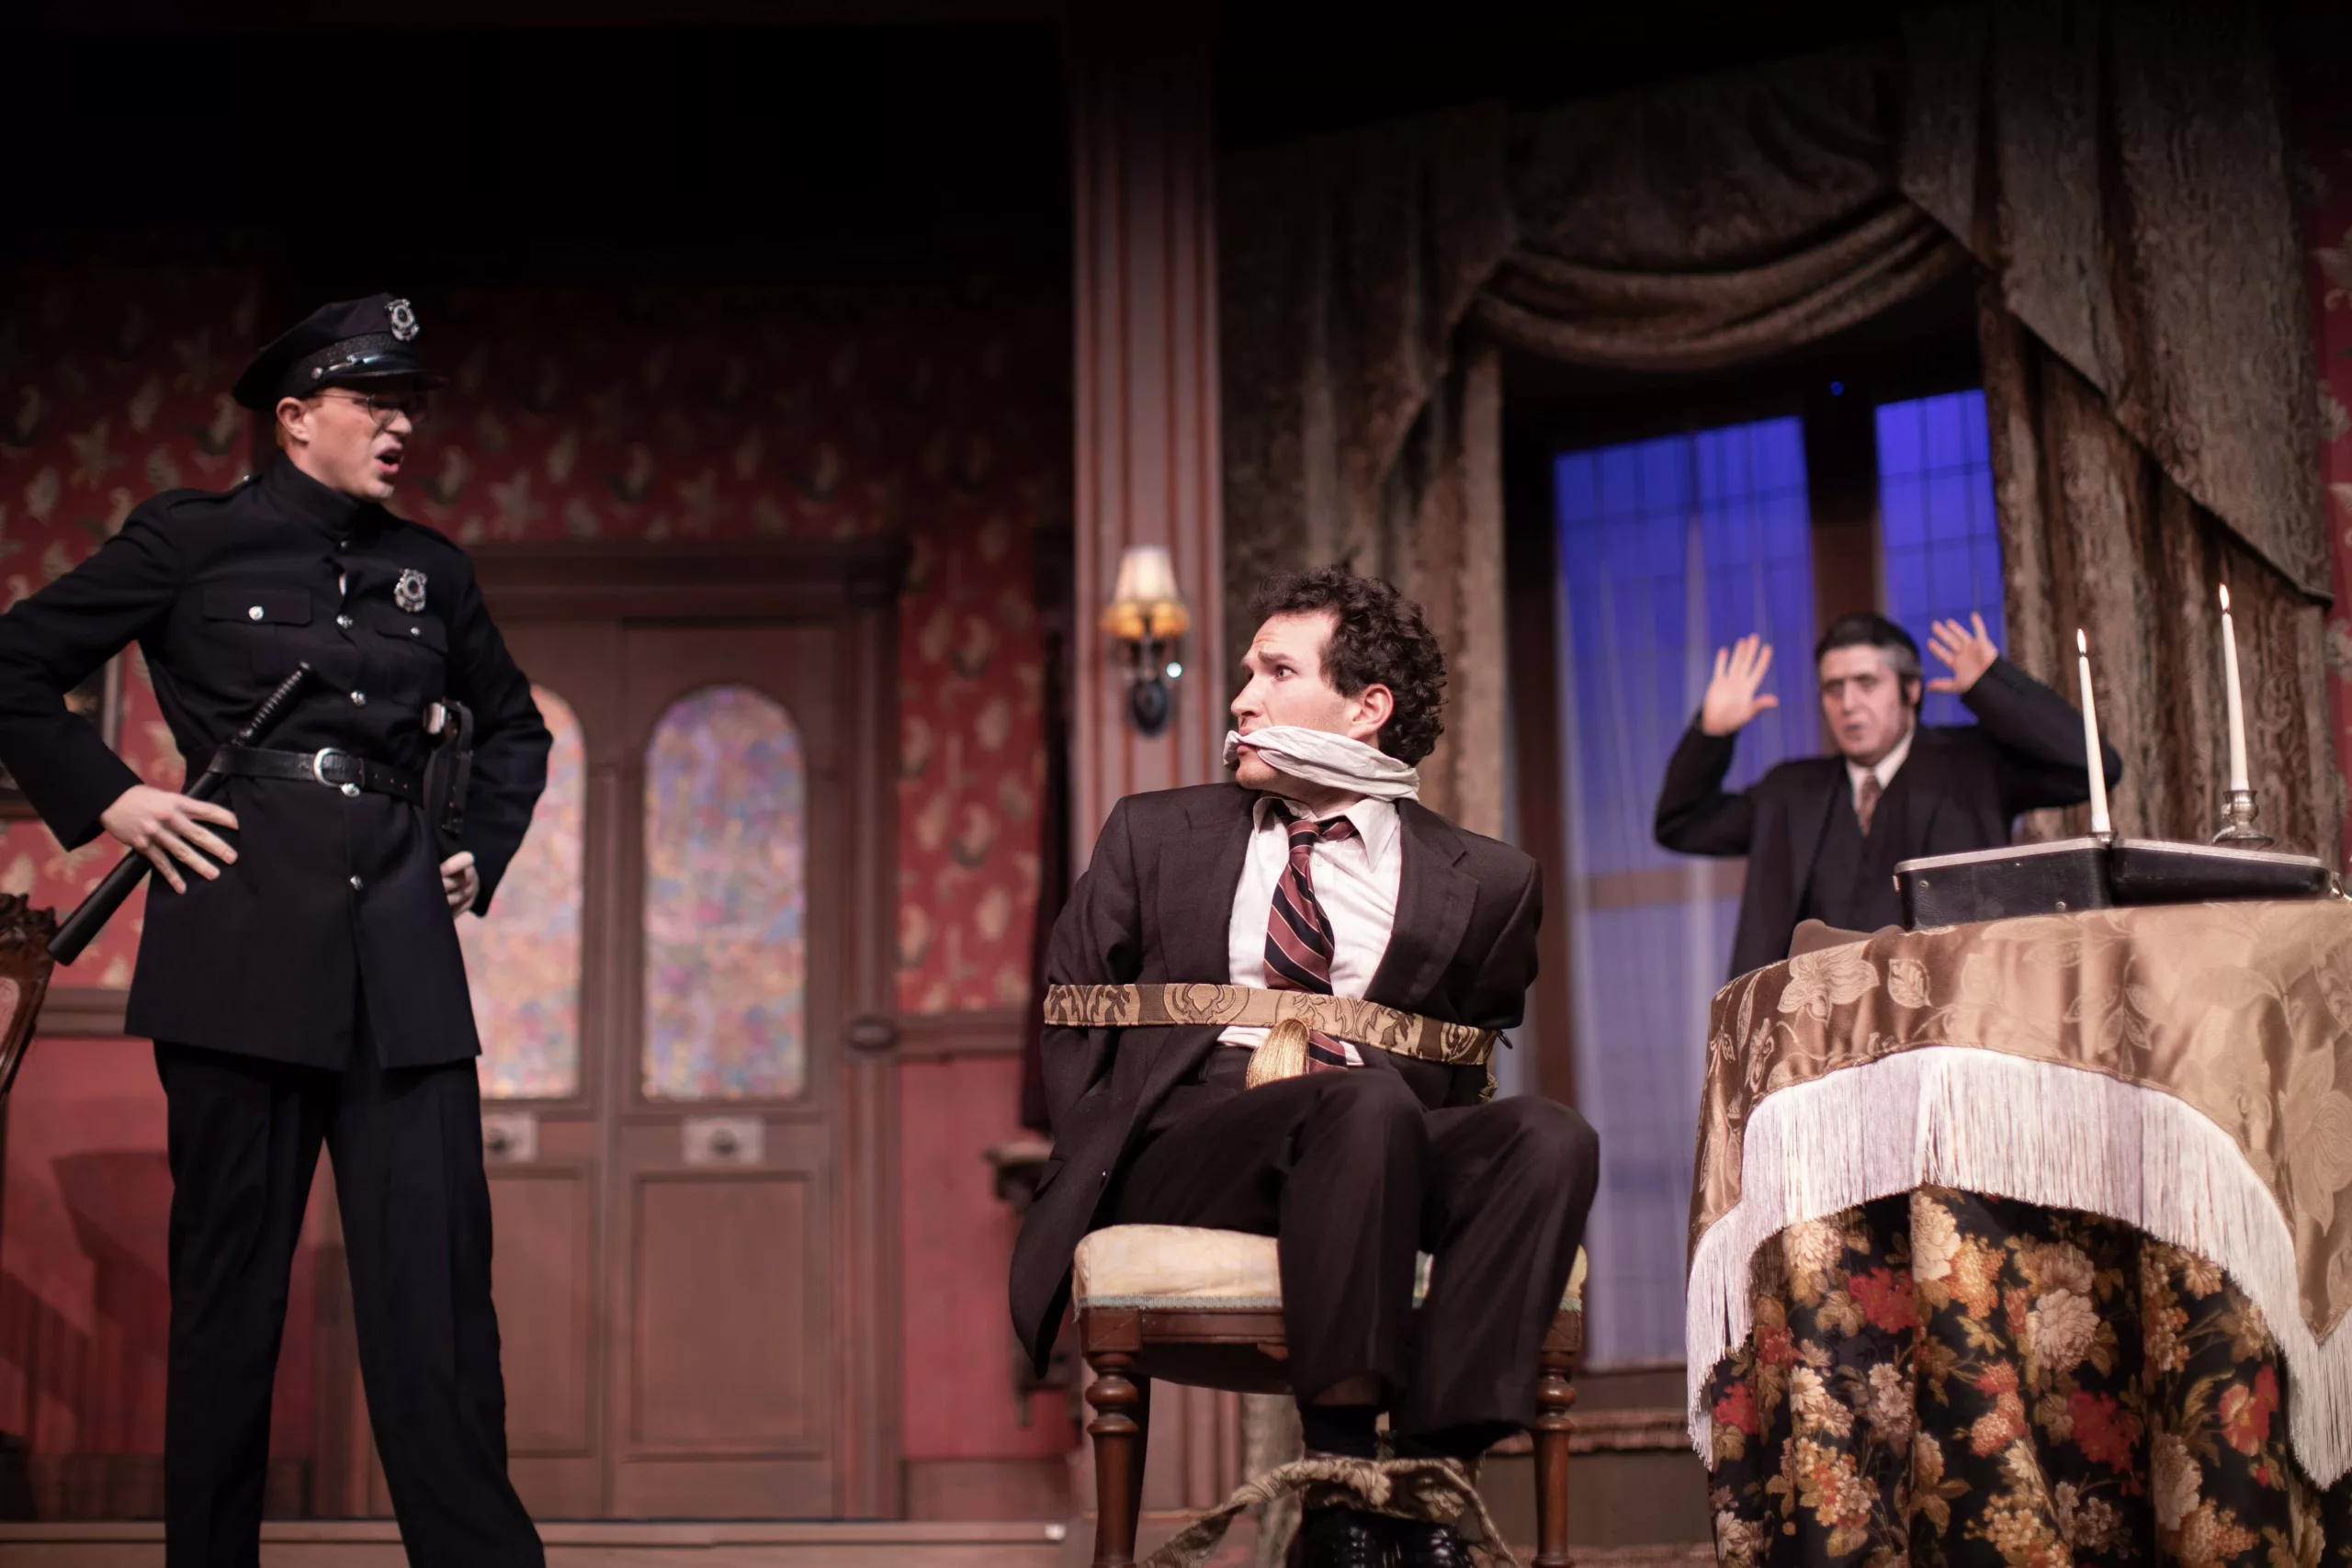 Arsenic and Old Lace performance.